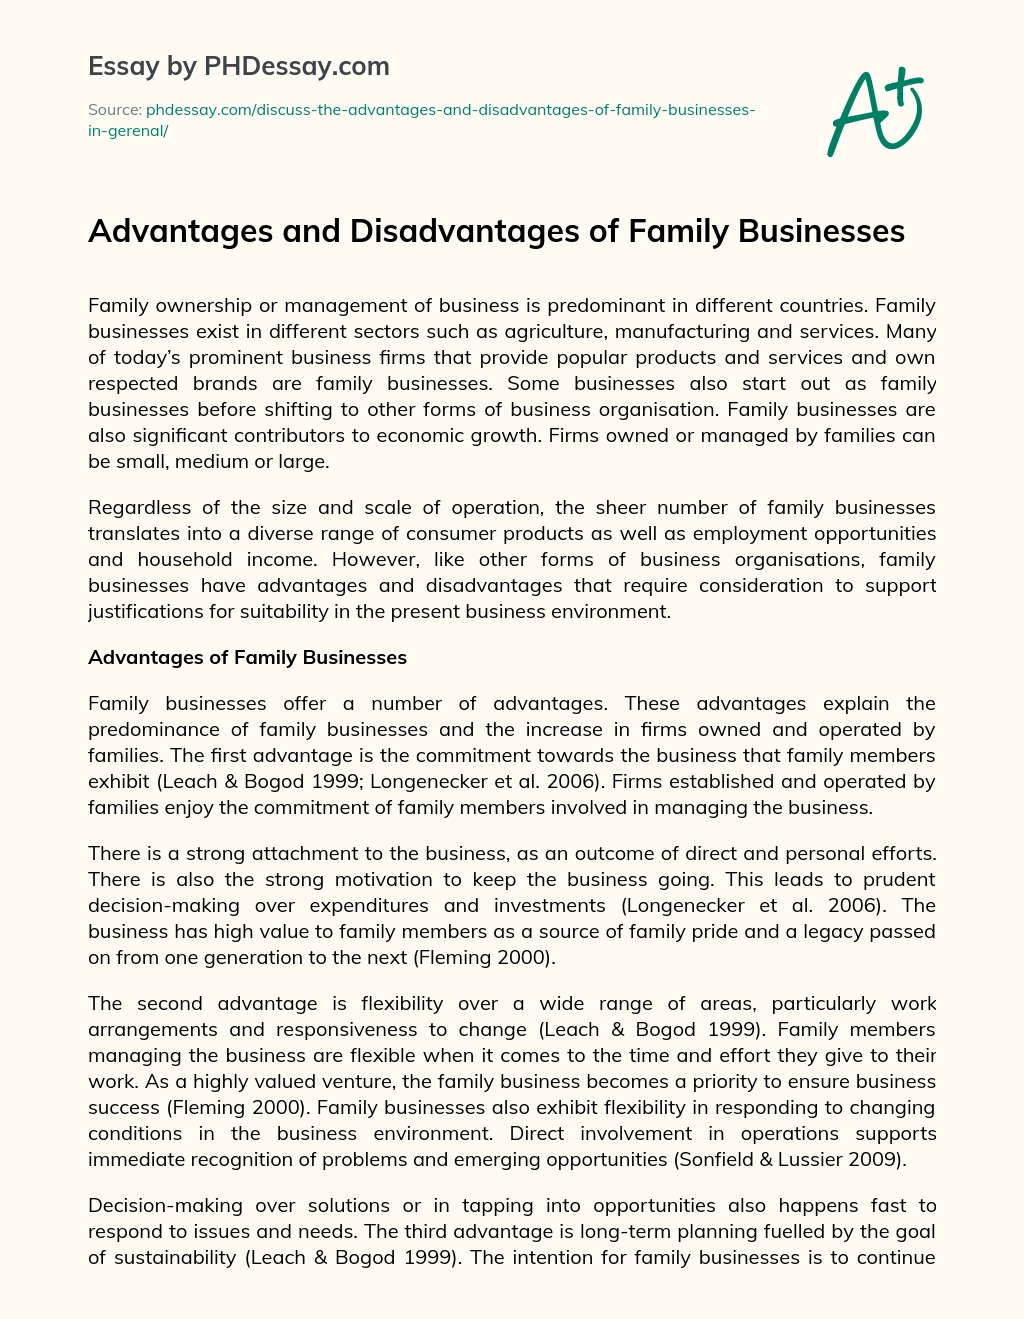 Advantages and Disadvantages of Family Businesses essay